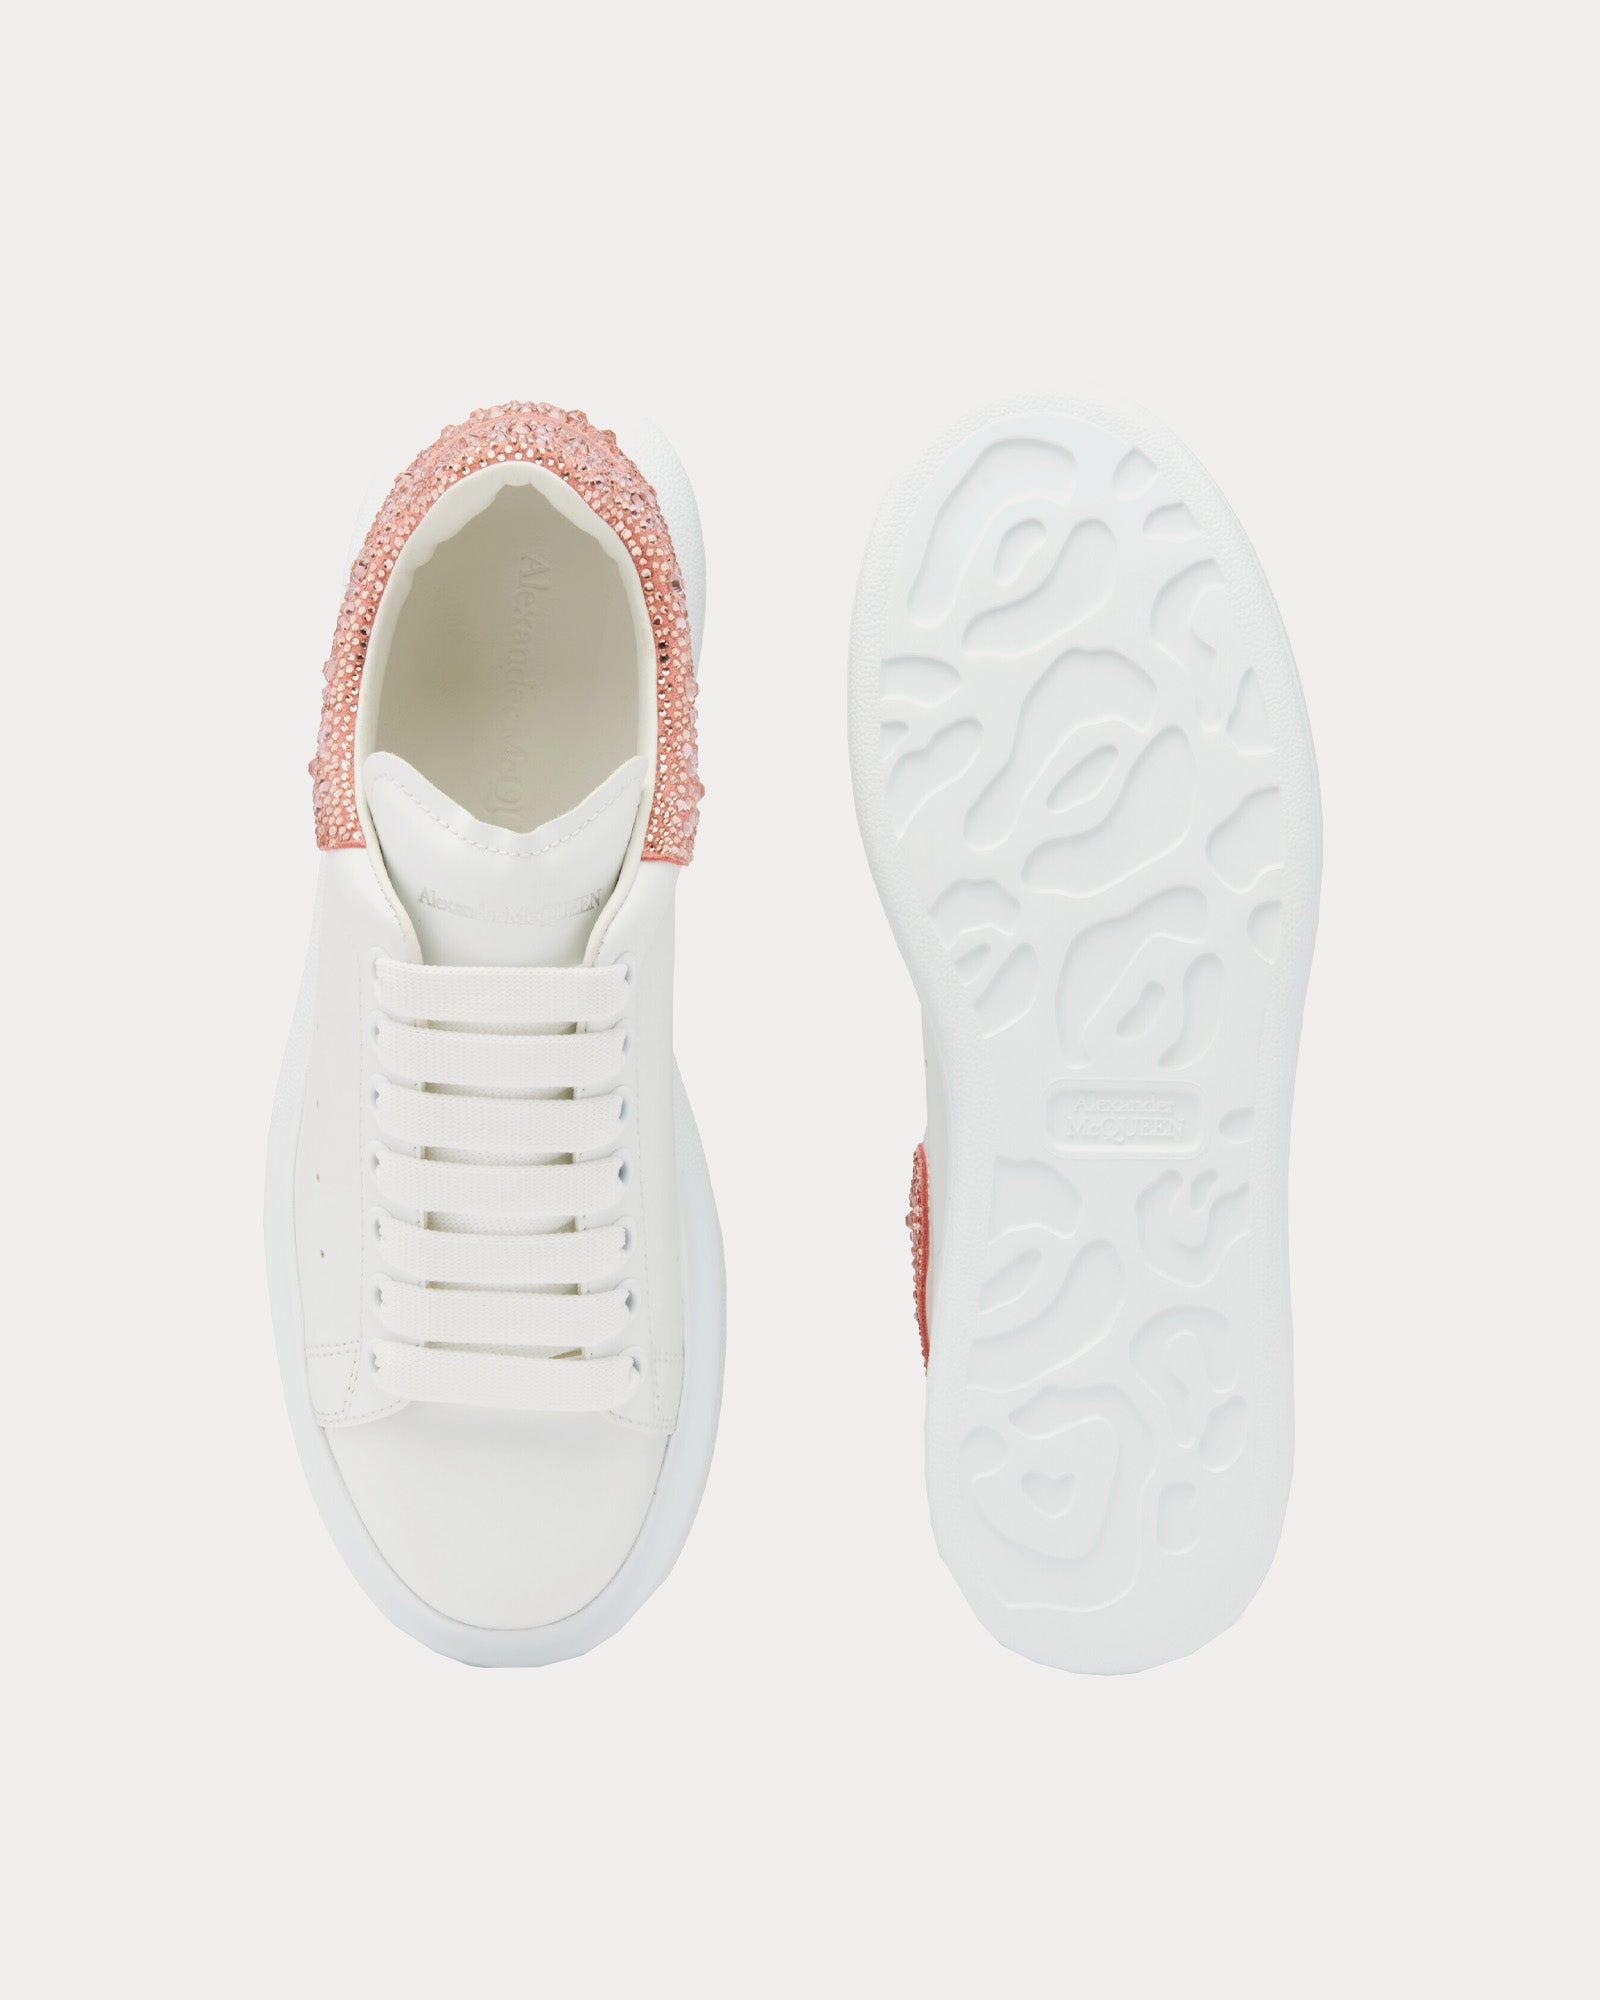 Alexander McQueen - Oversized with Crystal Embellished Heel White / Clay Low Top Sneakers